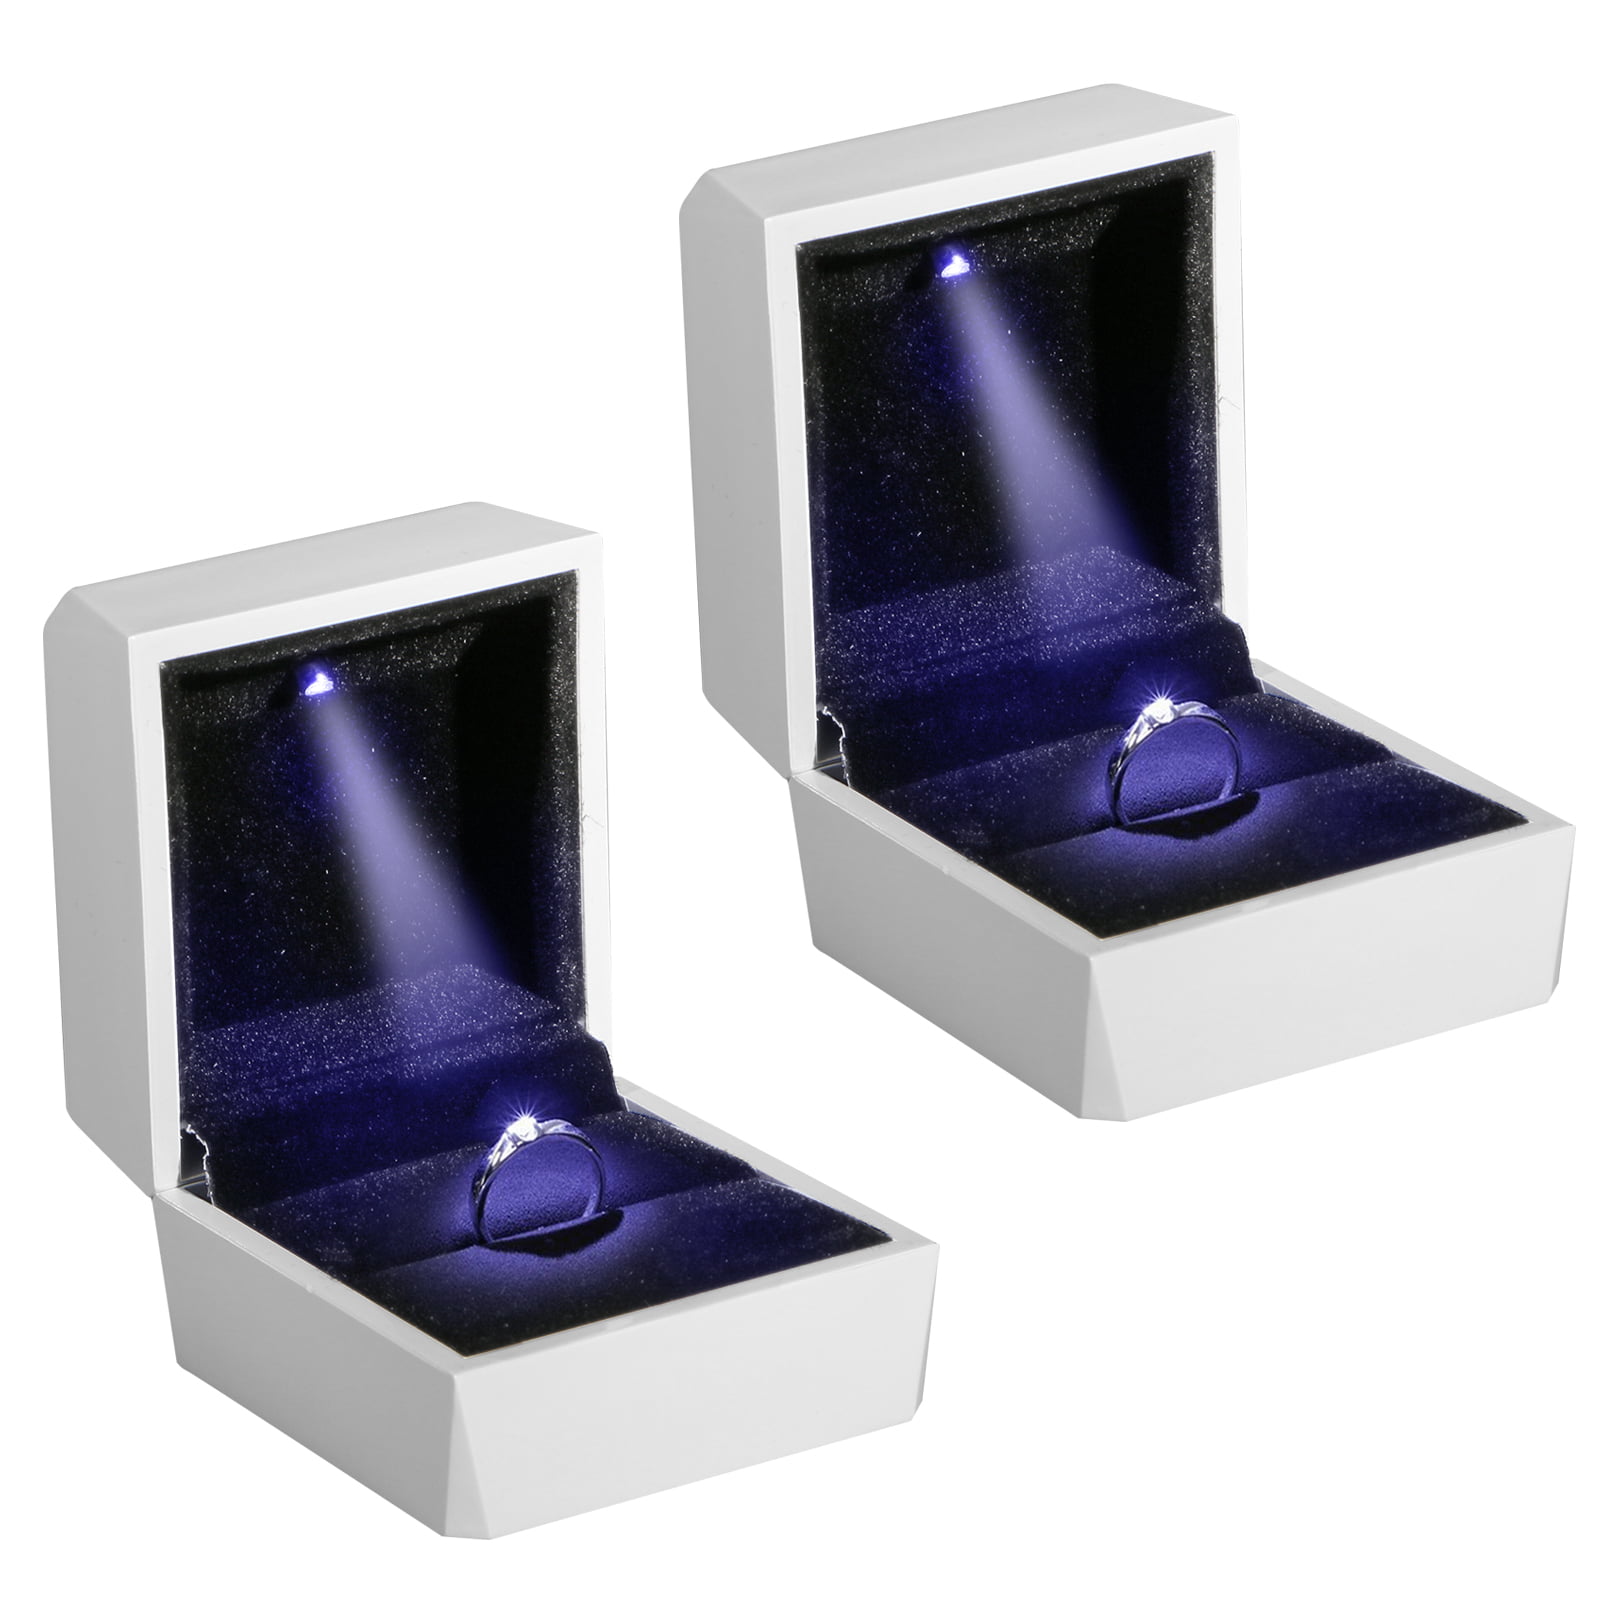 Details about   GENUINE BLACK LEATHER WHITE SUEDE LED LIGHTED ENGAGEMENT RING BOX WEDDING BANDS 